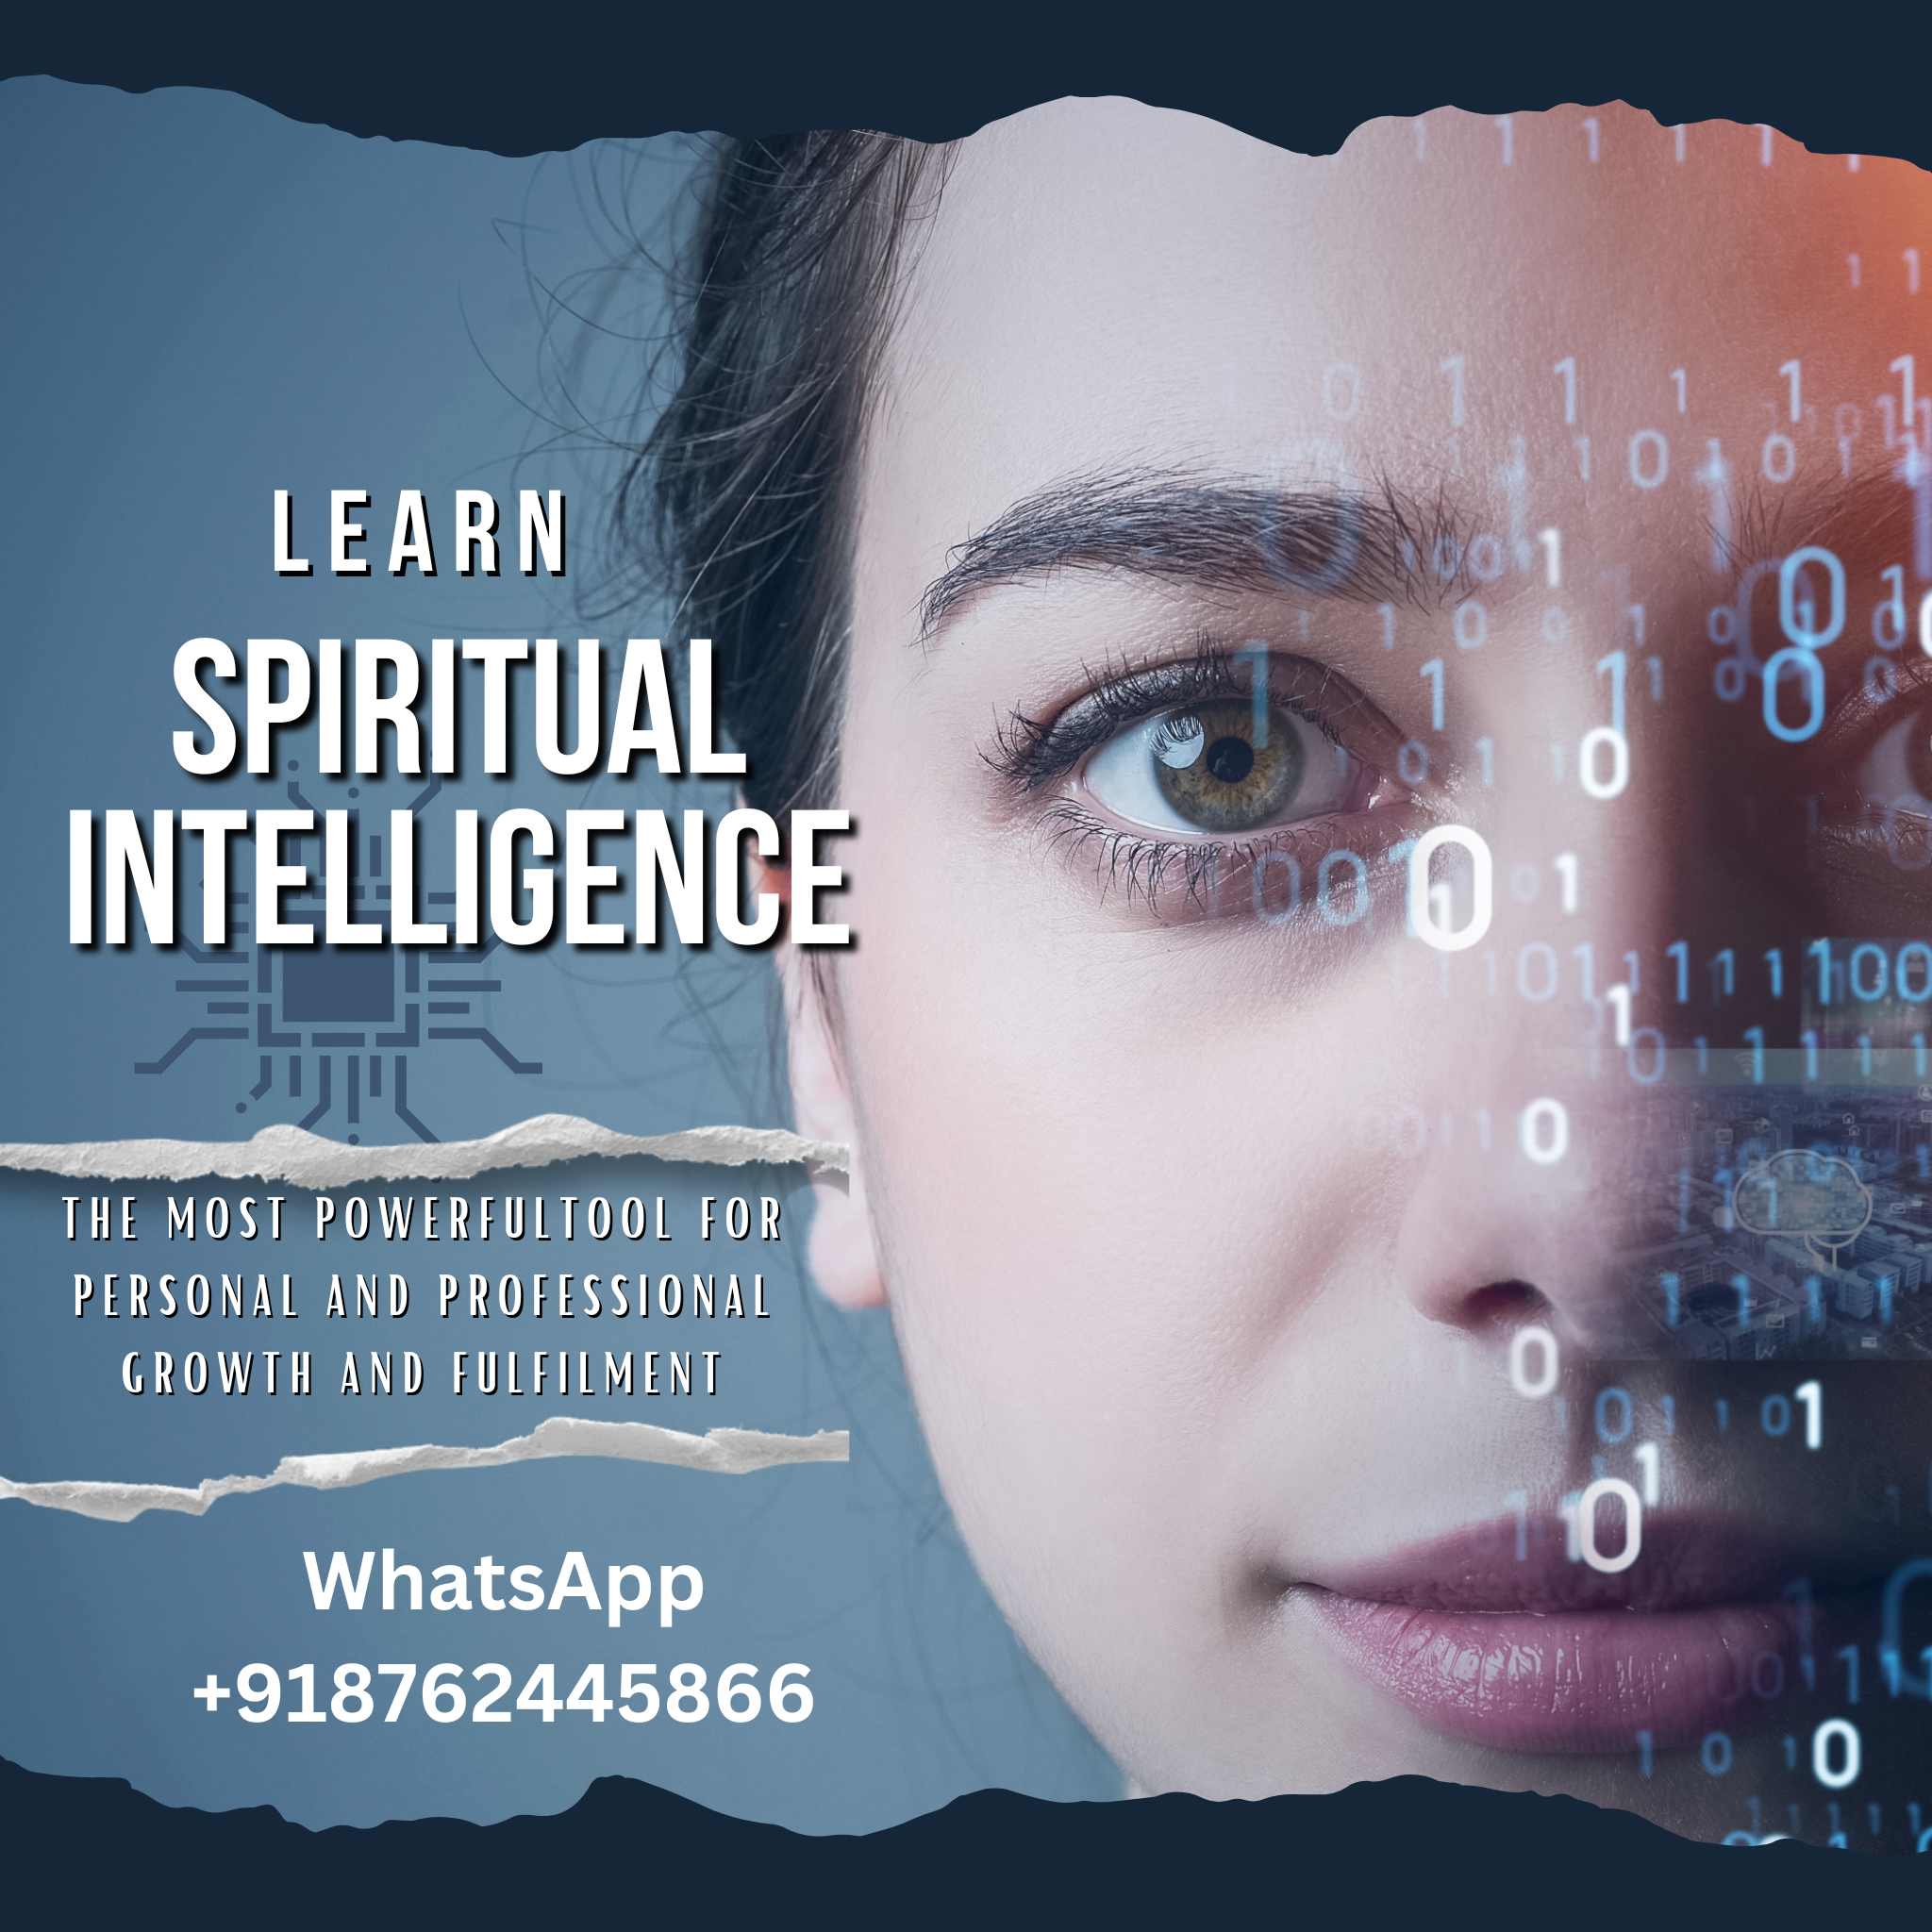 Join Spiritual intelligence Course, Upgrade your life.